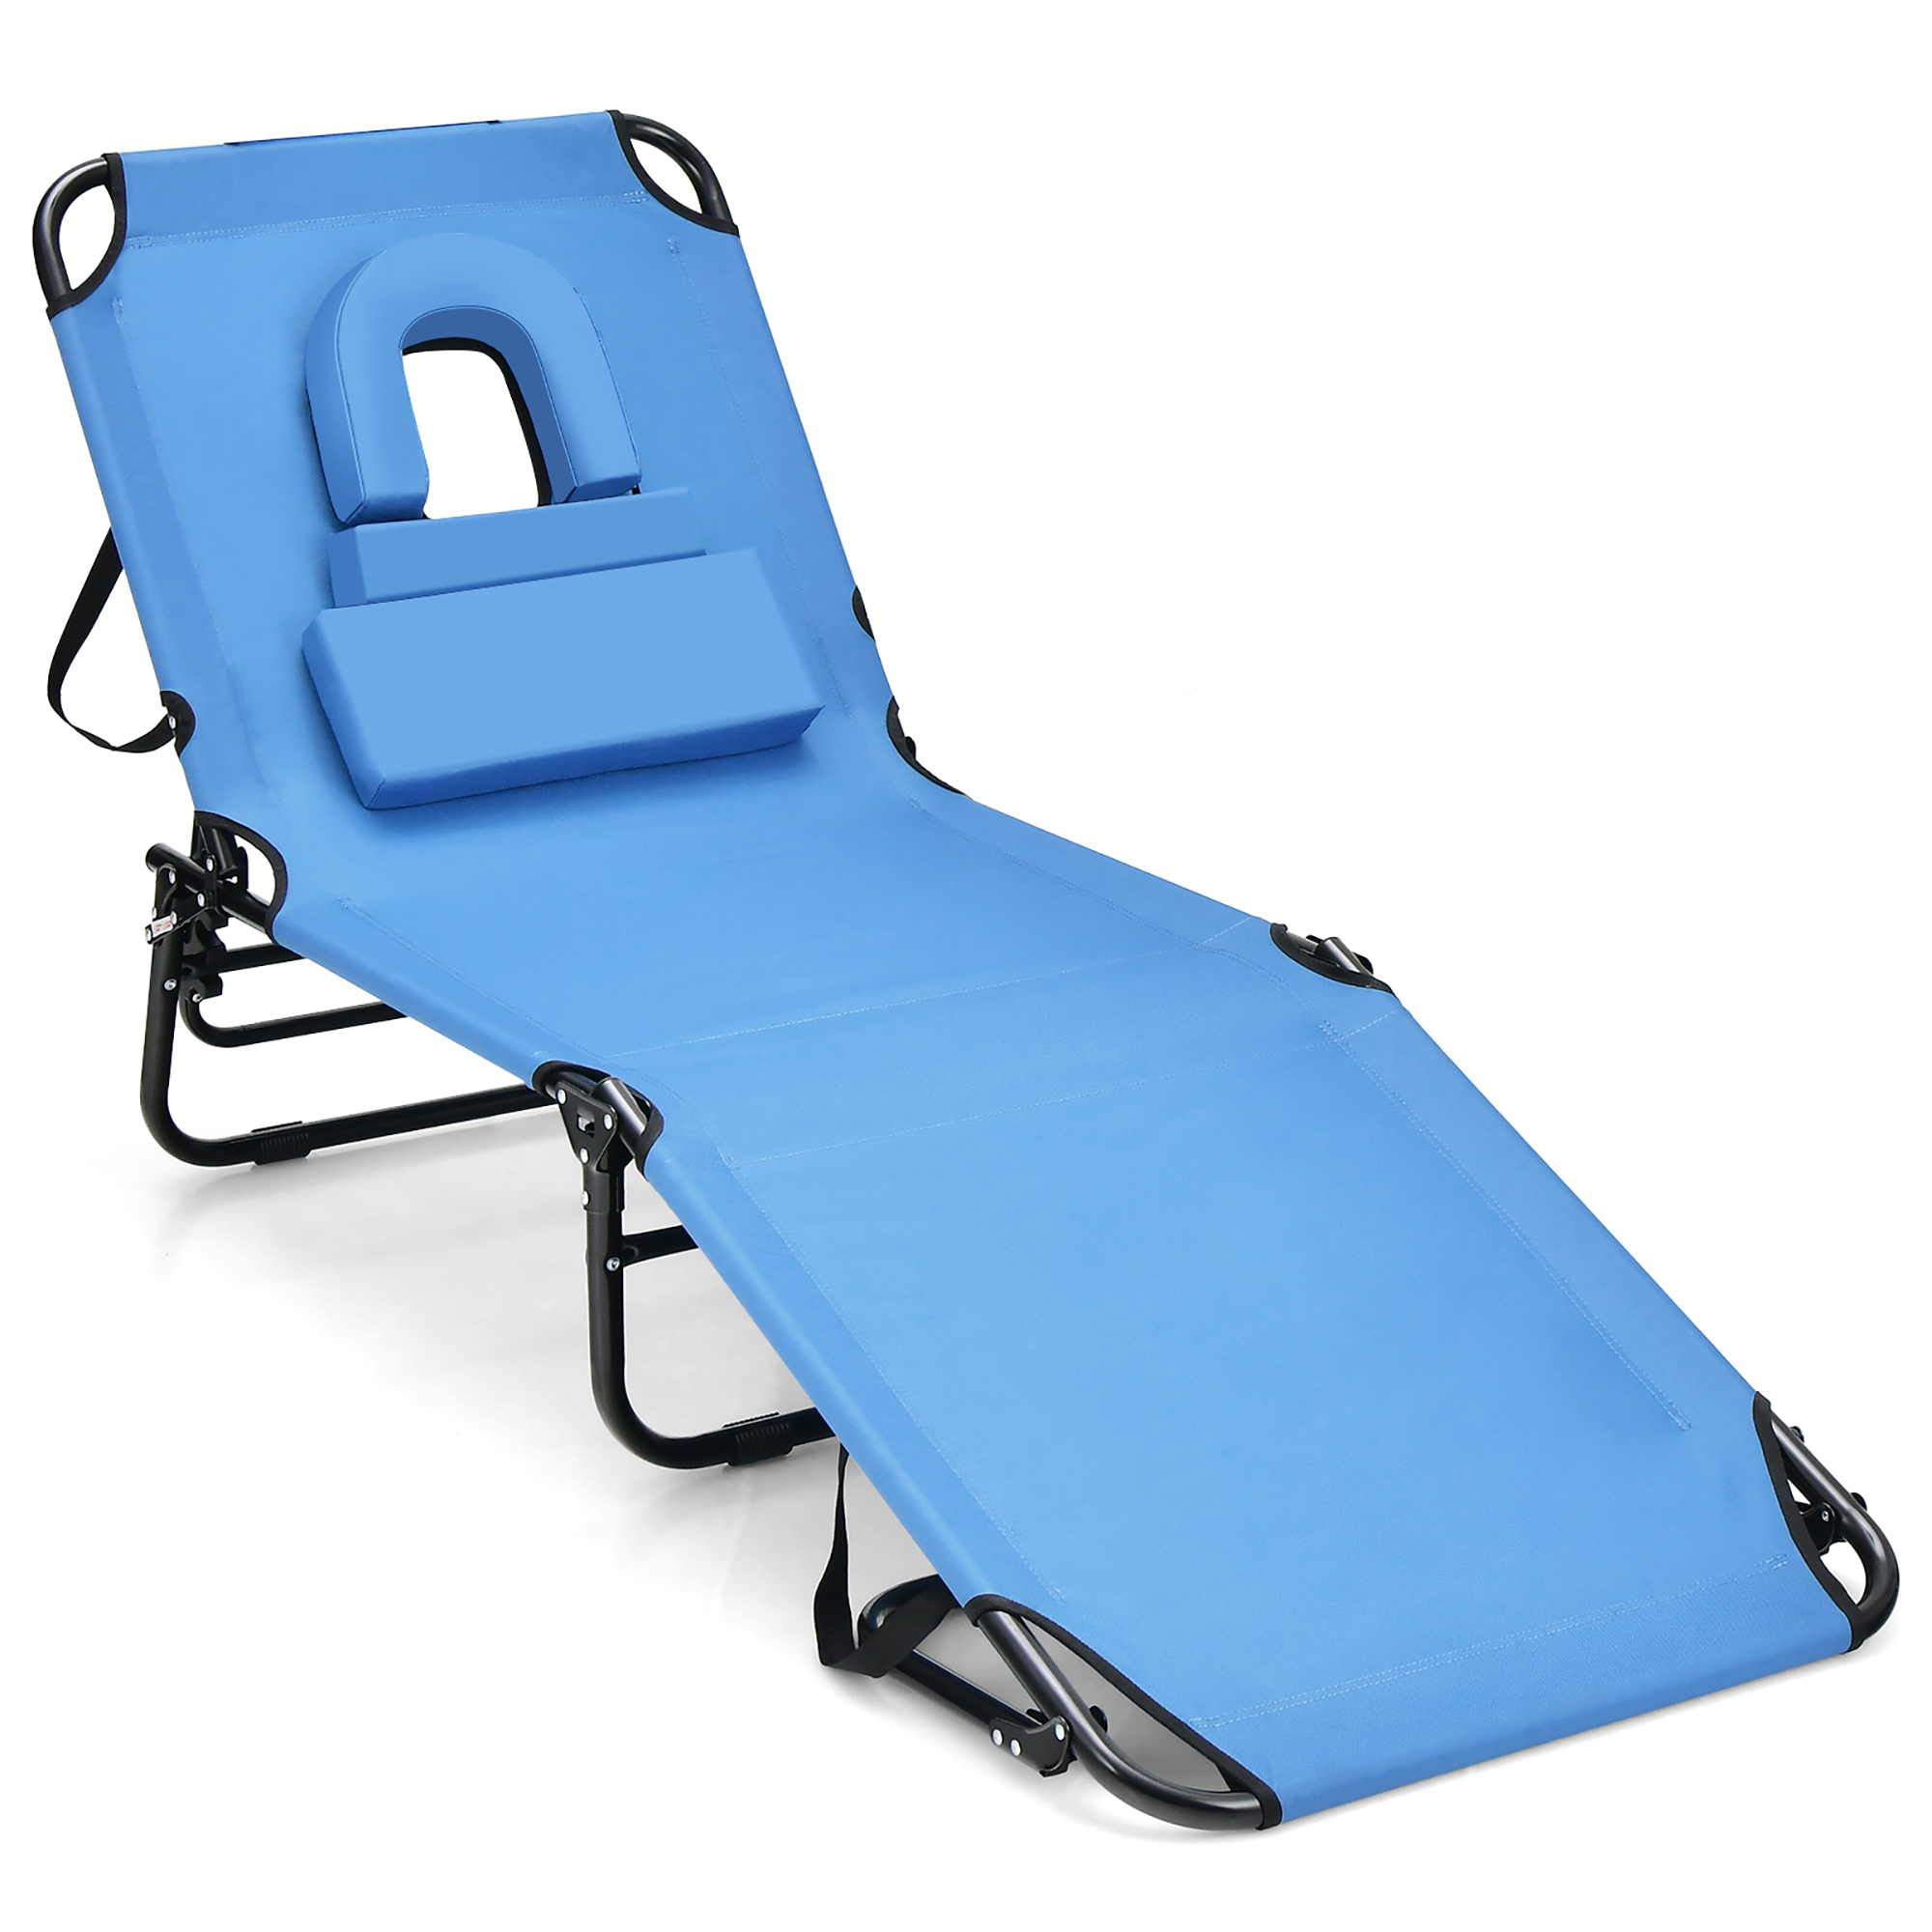 Costway Beach Chaise Lounge Chair with Face Hole Pillows & 5-Position Adjustable Backrest Blue - image 3 of 10